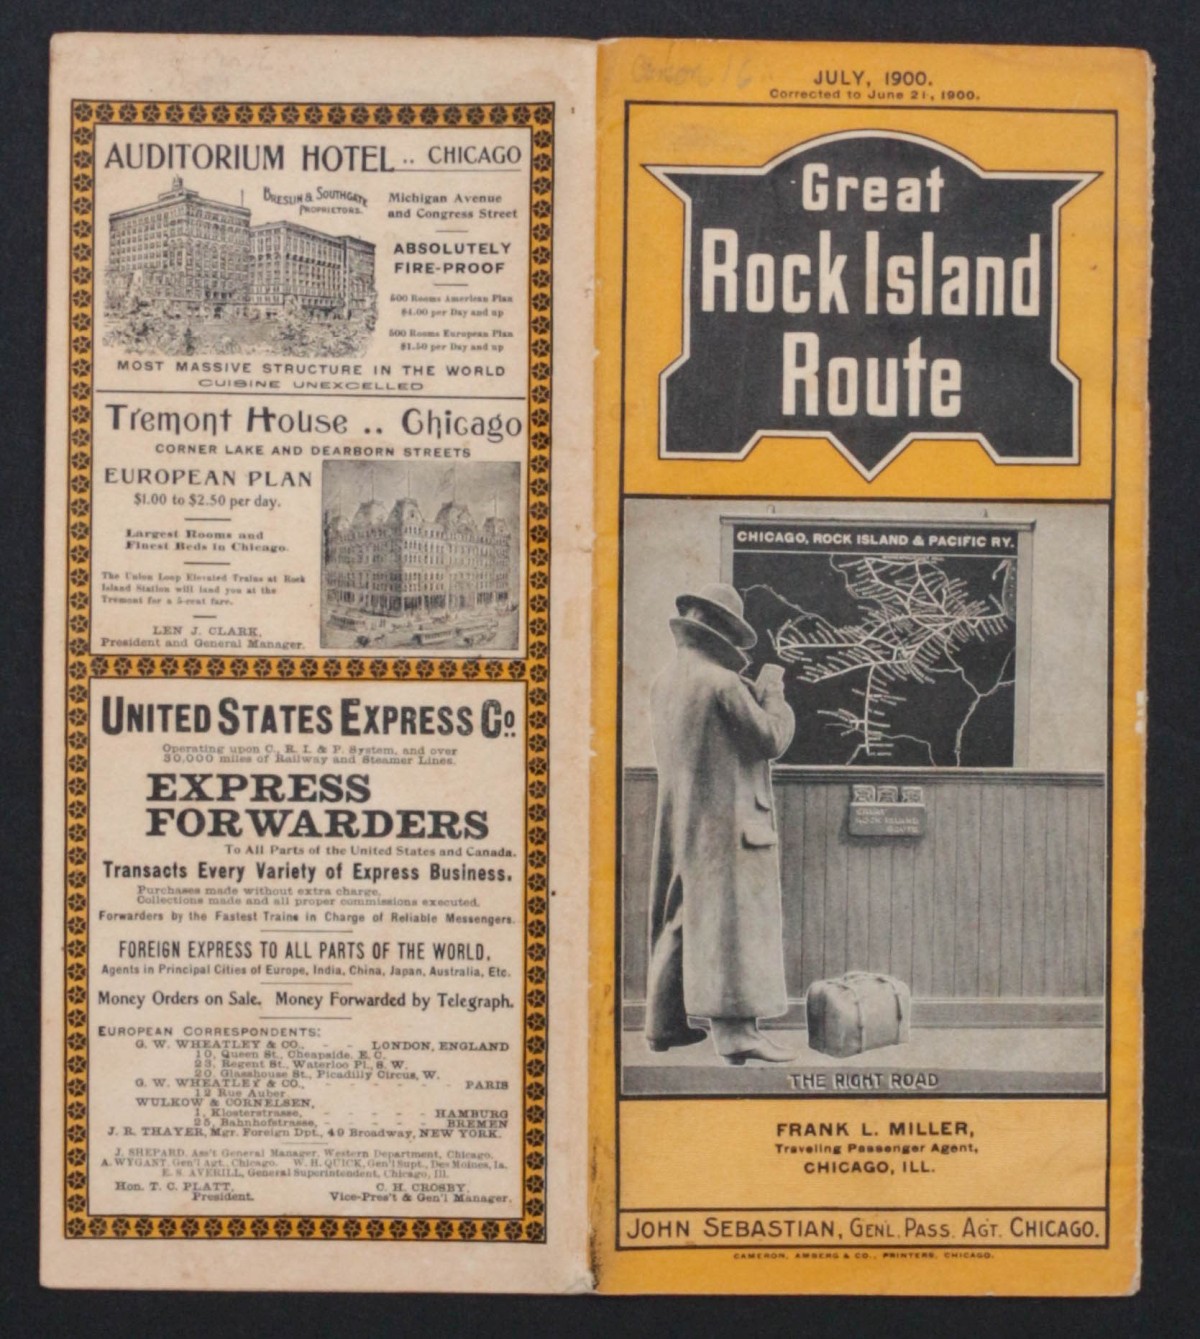 GREAT ROCK ISLAND ROUTE TIMETABLE FOR JULY 1900